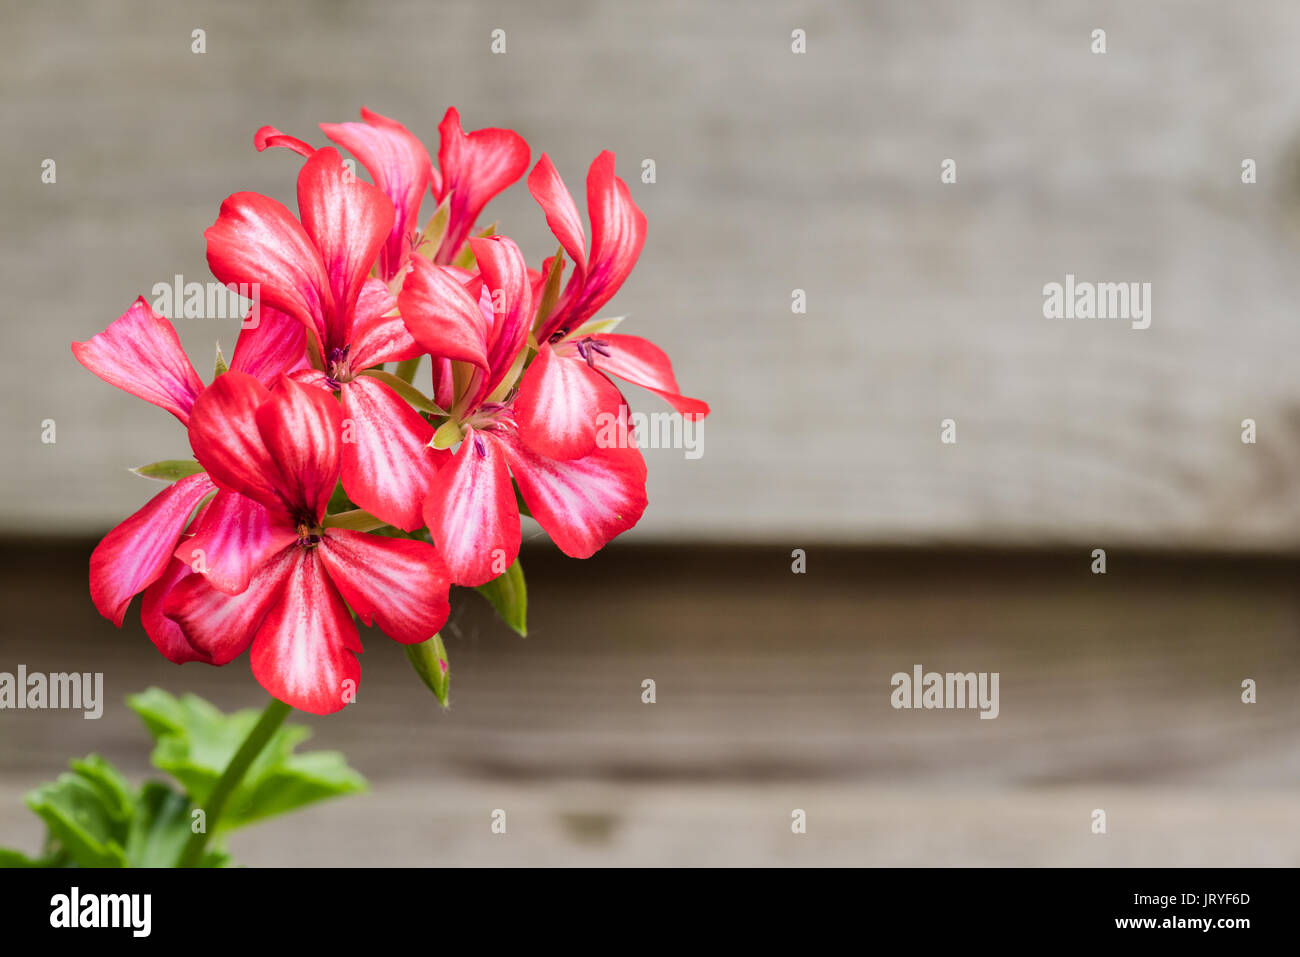 The flower of a red white pelargonium in full bloom isolated against wood with copy space on the right. Stock Photo